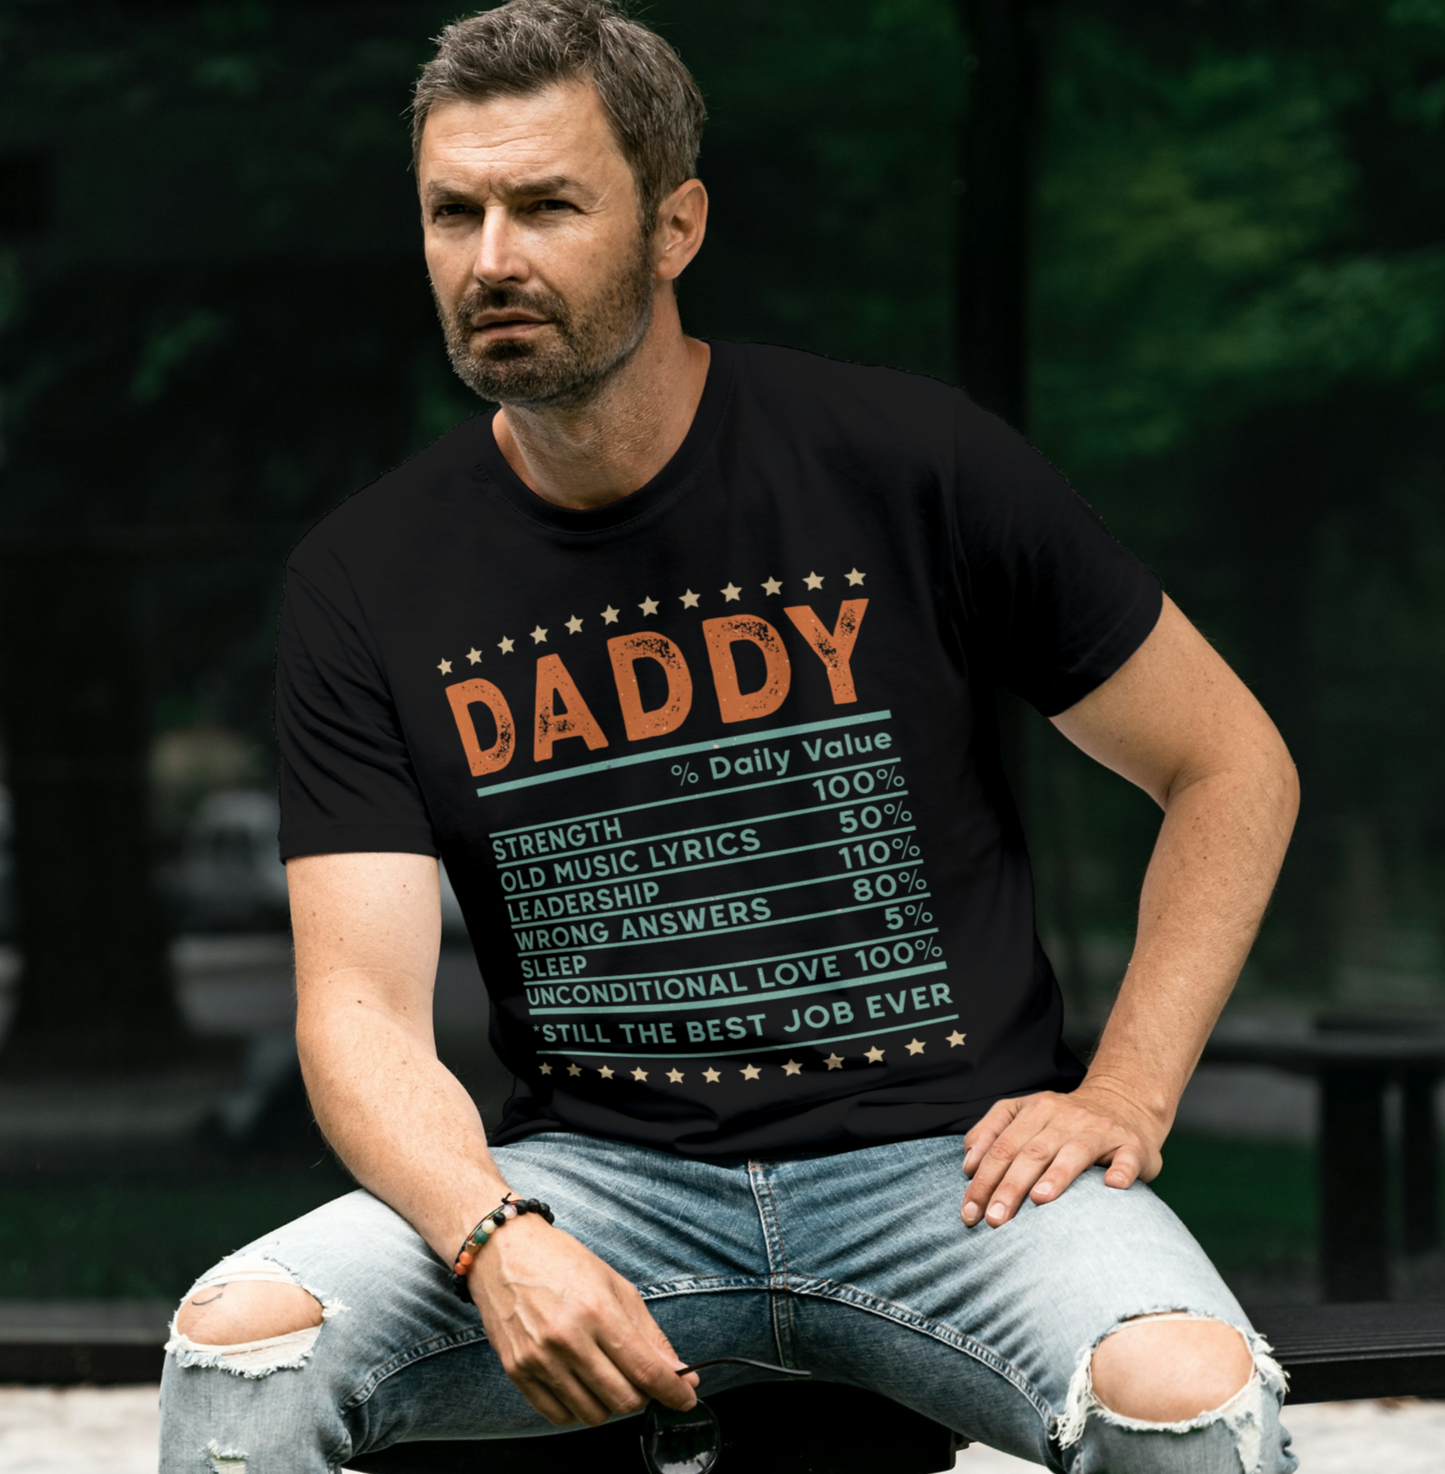 Daddy Nutritional Facts T-Shirt